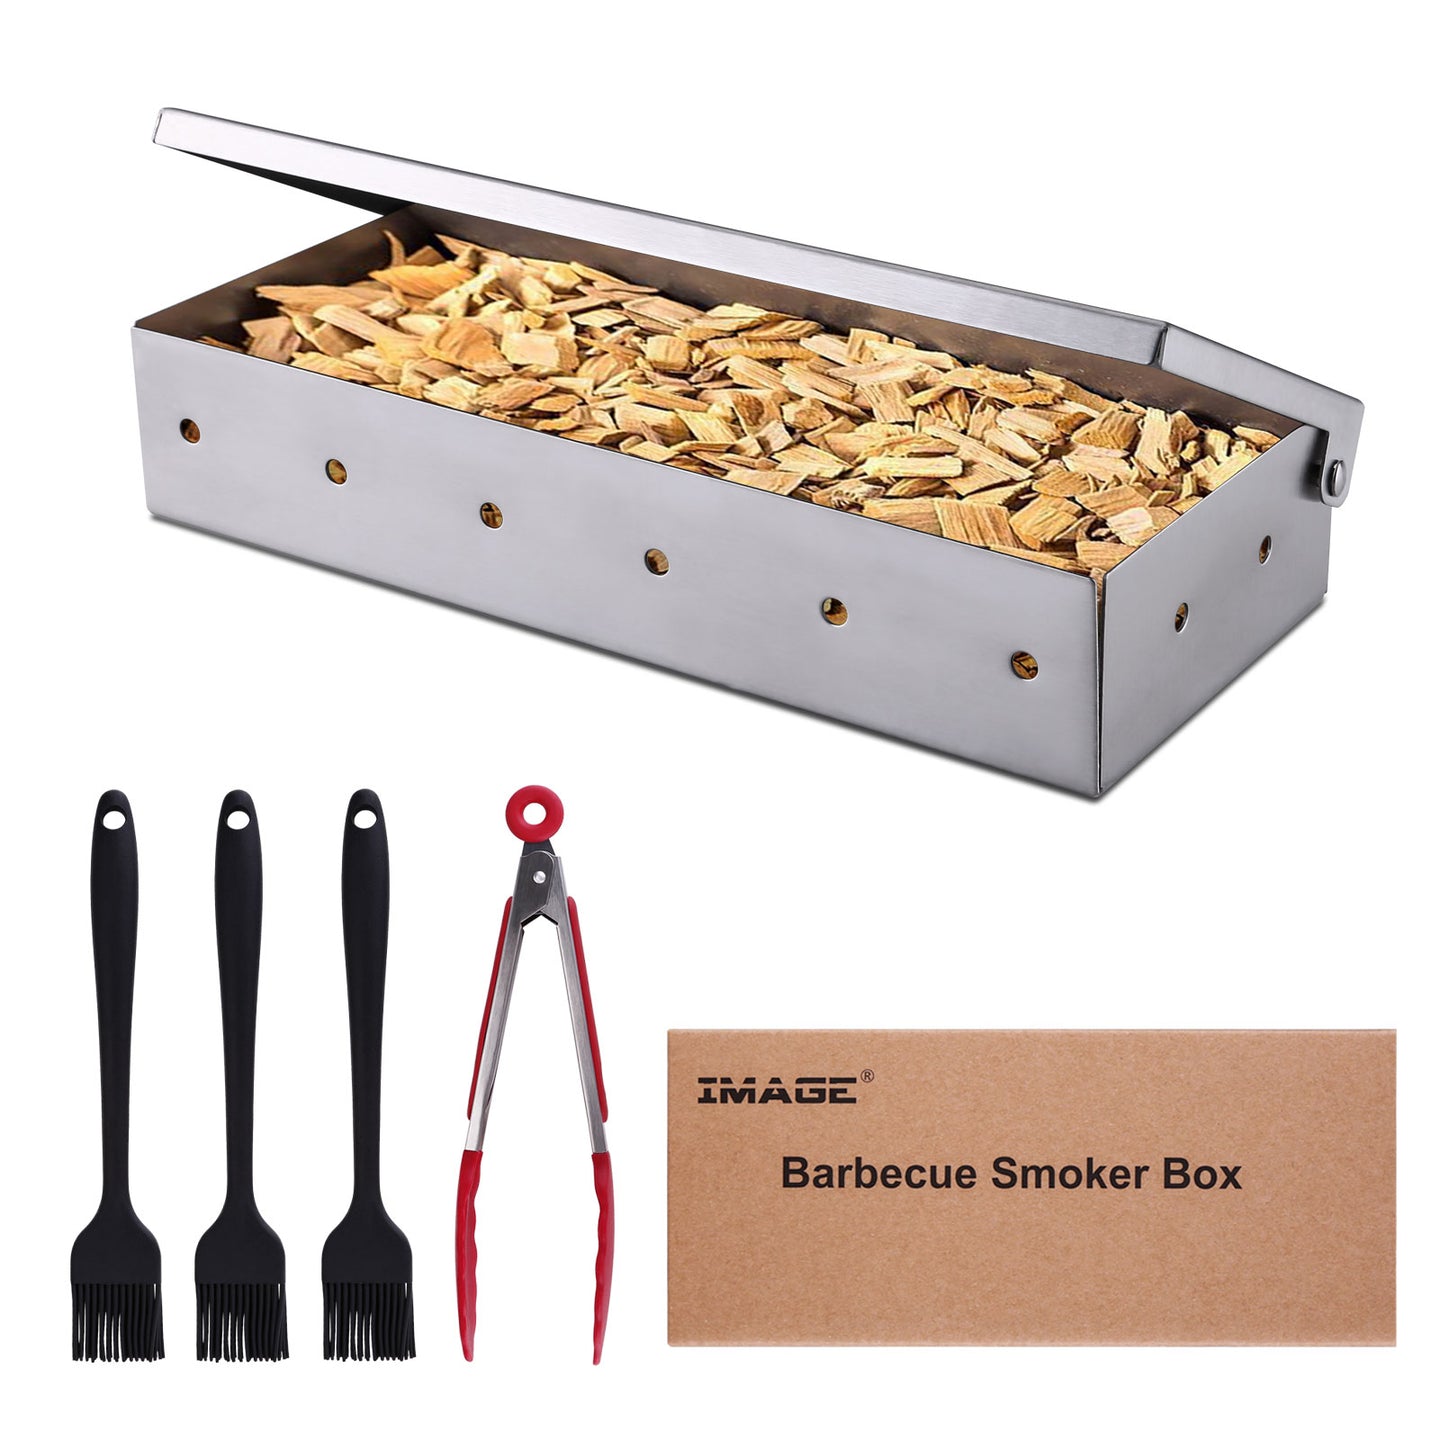 Smoker Box, IAMGE Heavy Duty Stainless Steel Smoker Box Gas Grill, BBQ Smoker Box for Wood Chips with Large Vent and Hinged Lid, Barbecue Meat Smoking for Charcoal and Gas Grills